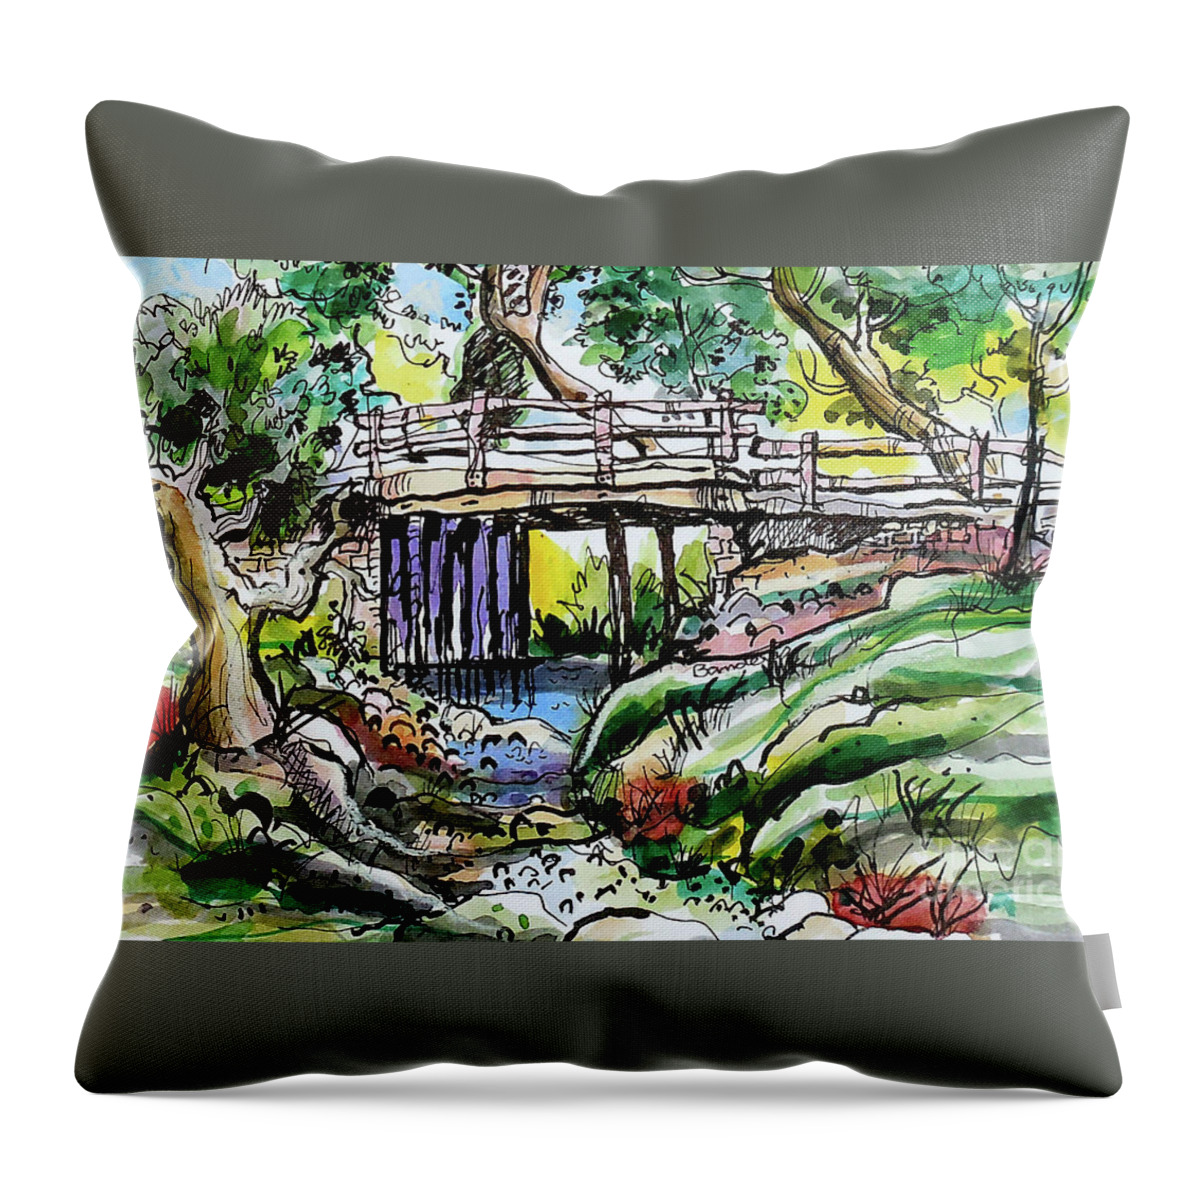 Creek Throw Pillow featuring the painting Creek Bed And Bridge by Terry Banderas